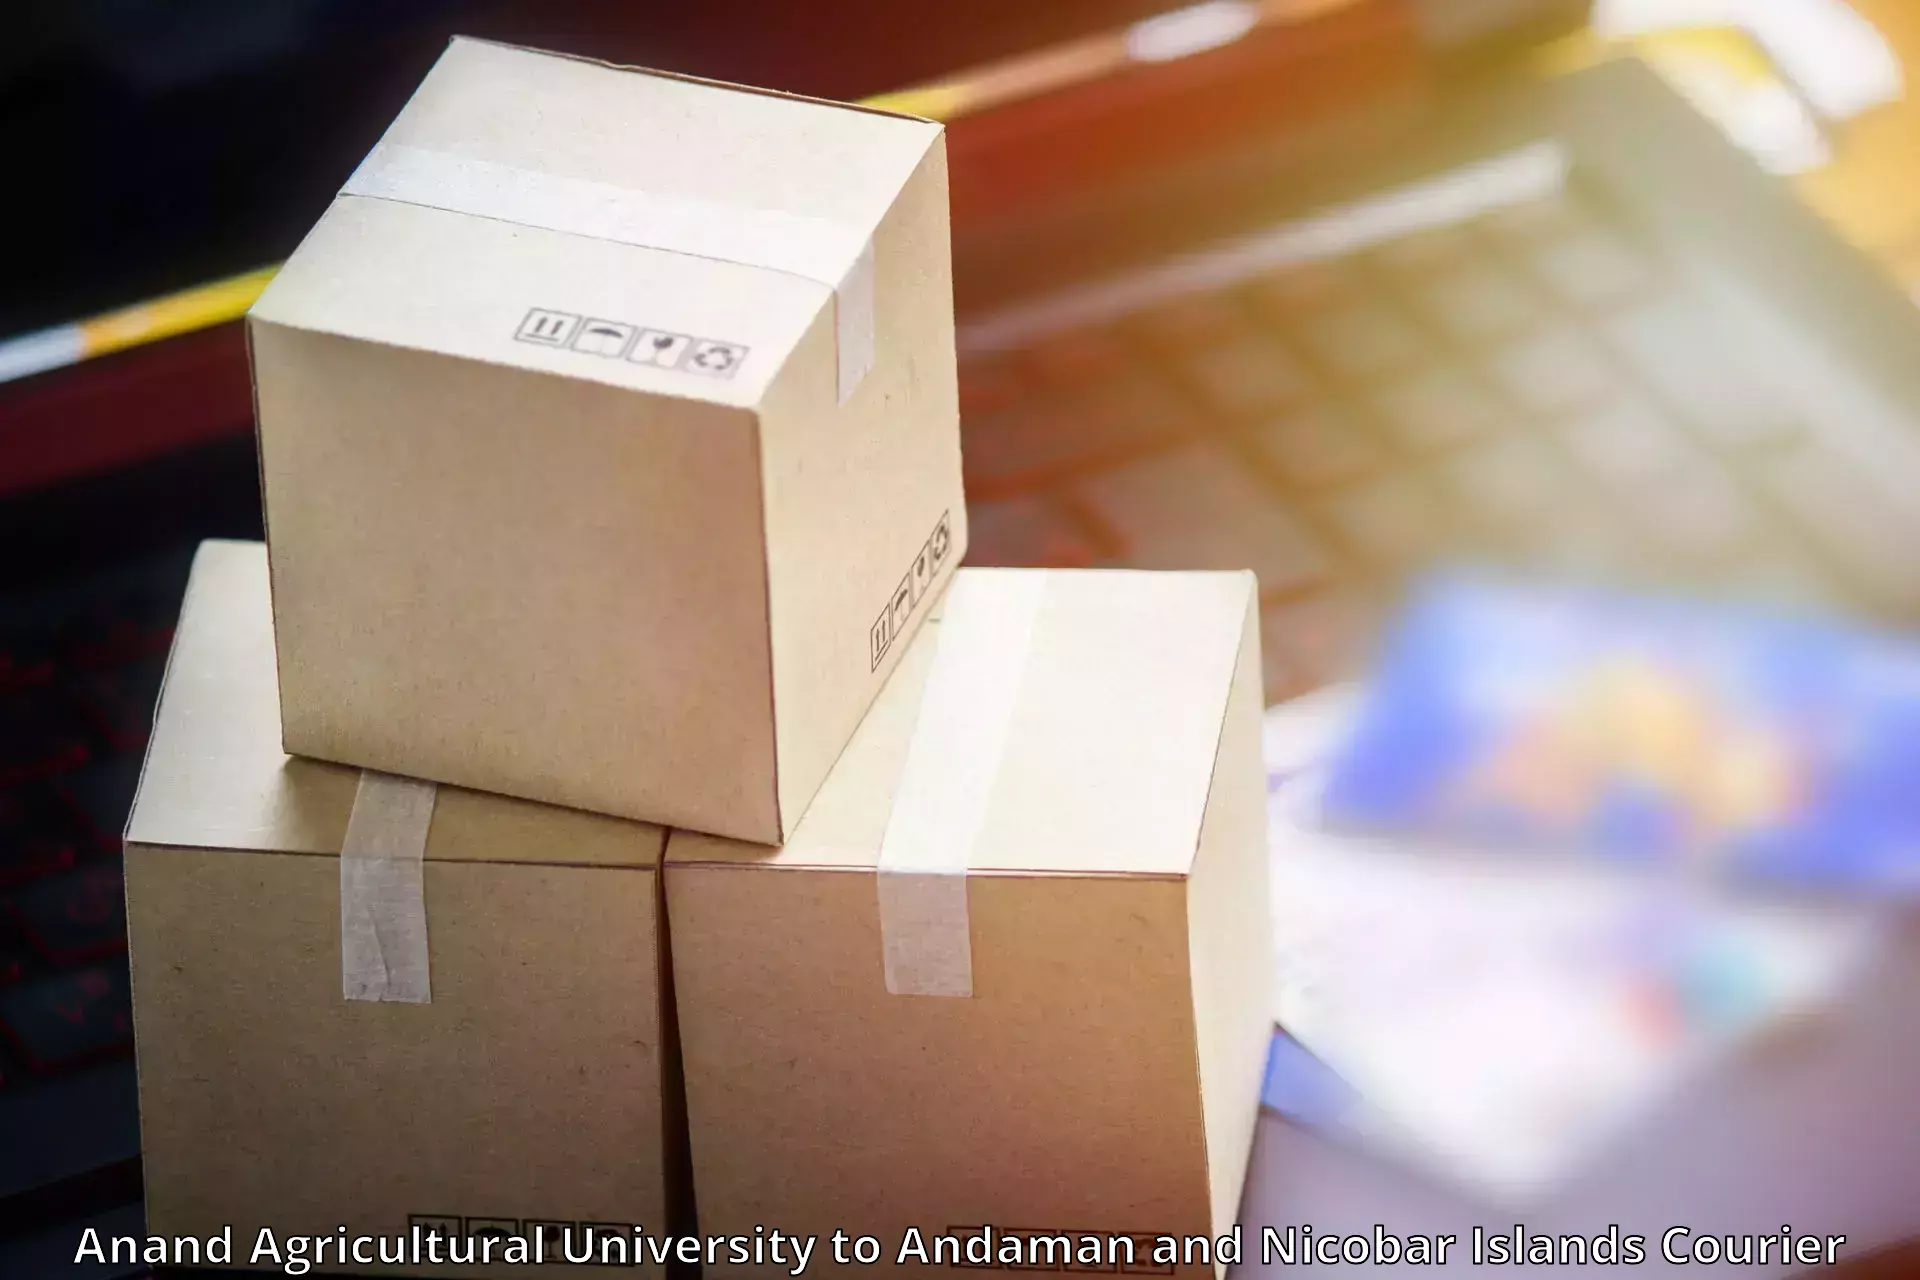 Cost-effective courier options Anand Agricultural University to North And Middle Andaman